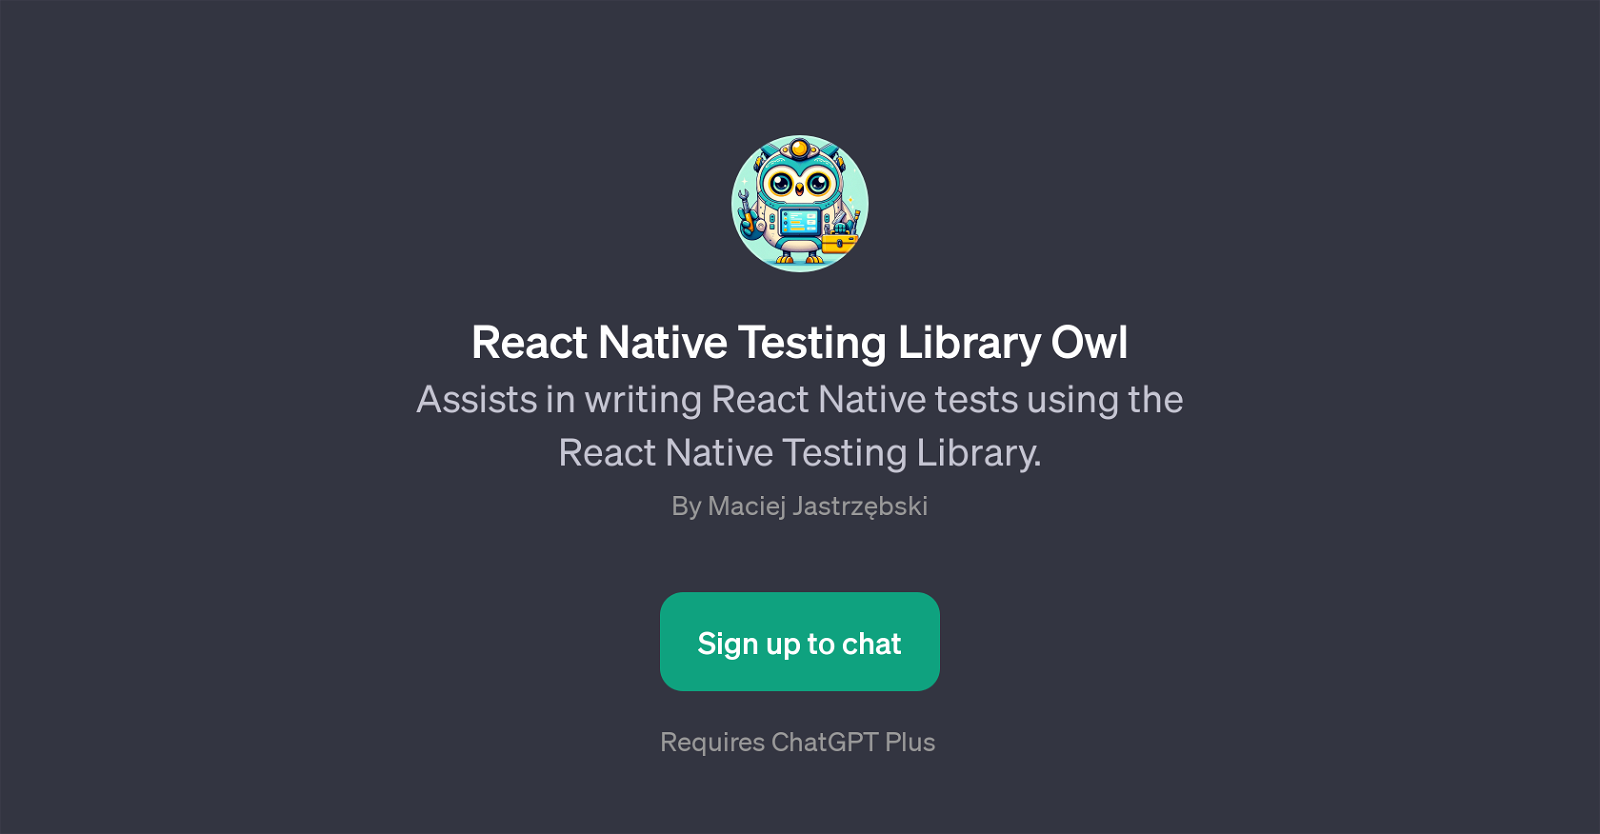 React Native Testing Library Owl website